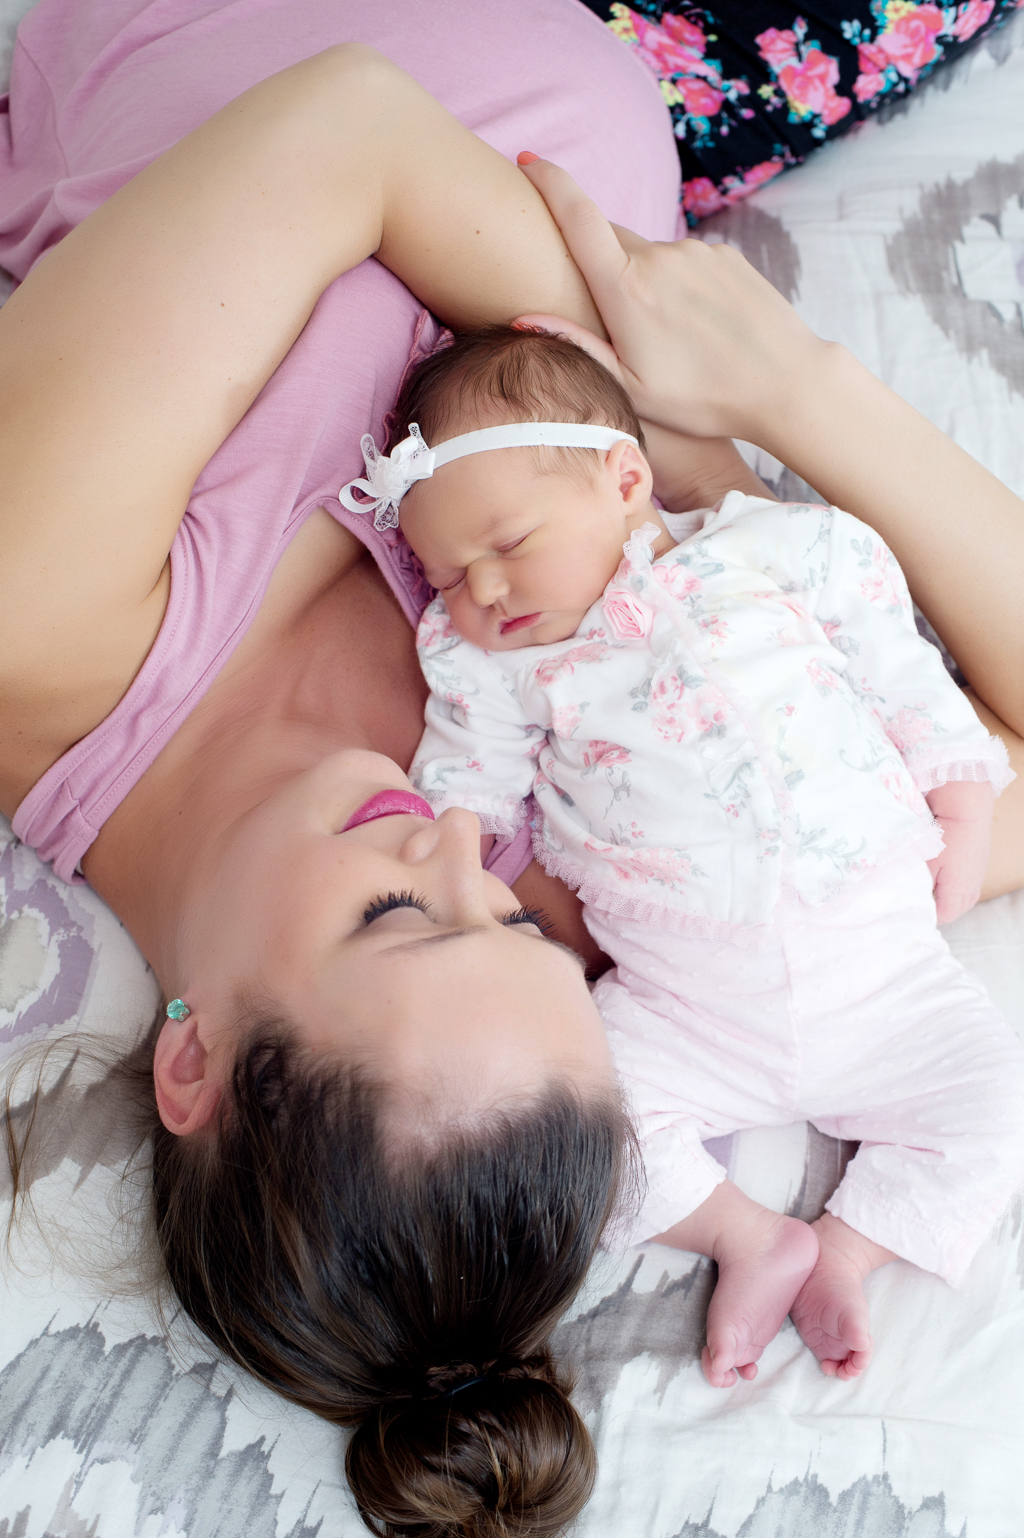 mom cuddles with newborn baby girl on bed